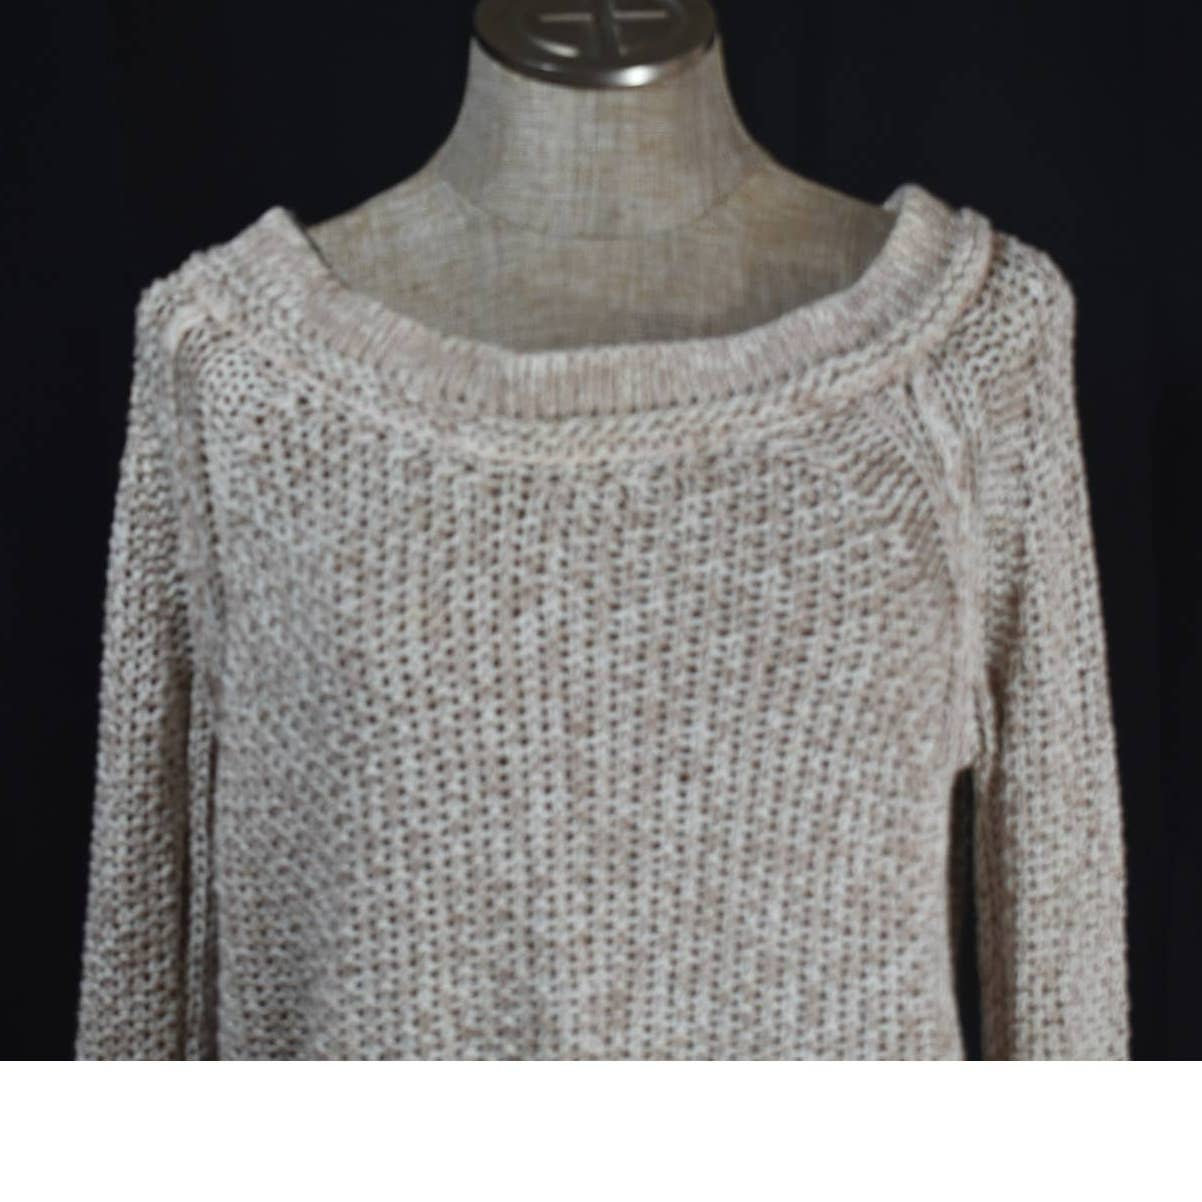 Free People Oatmeal Cropped Wide Neck Knit Sweater - XS